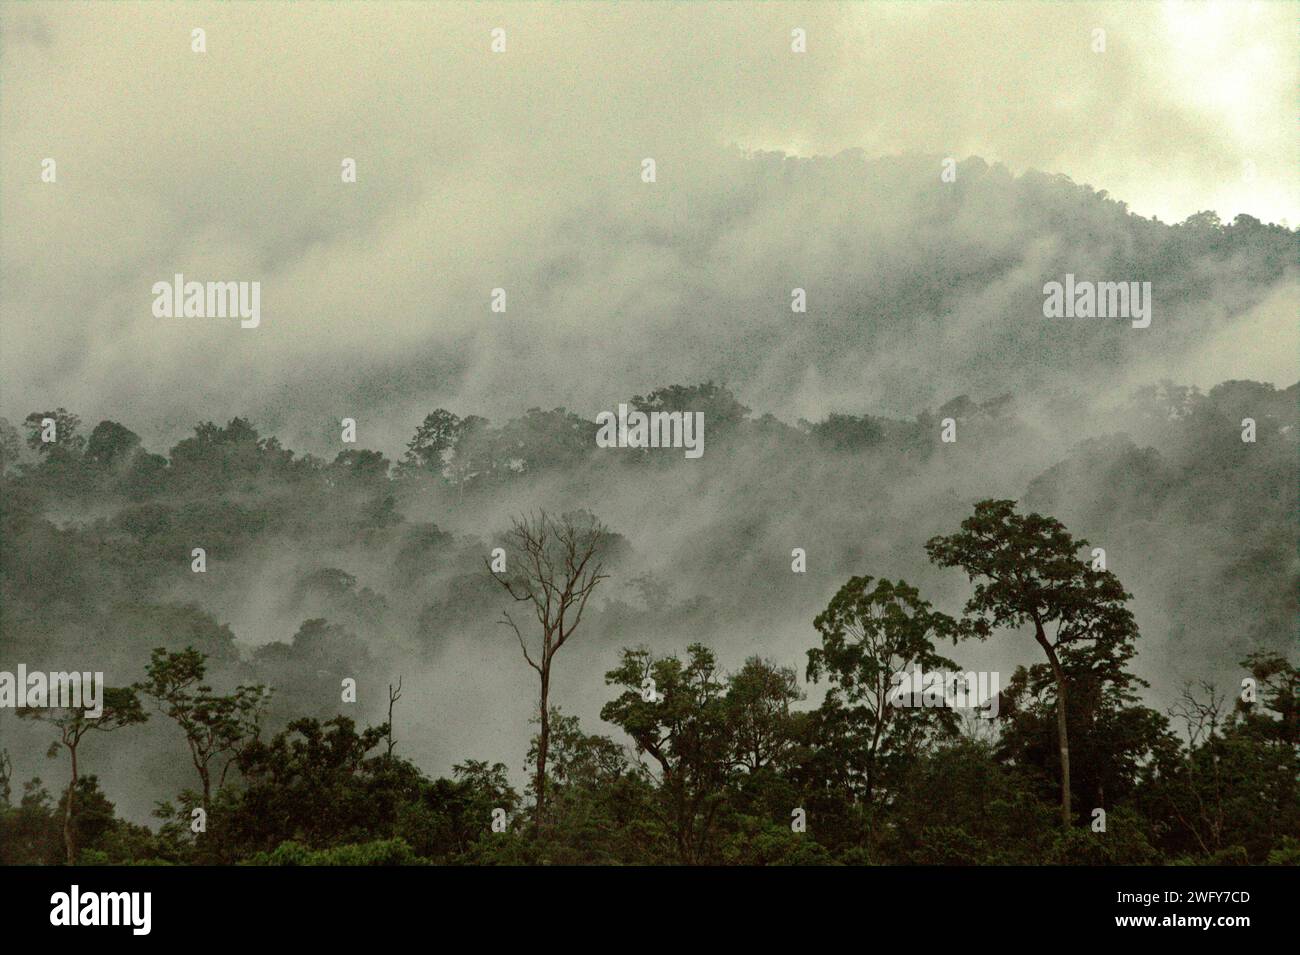 View of vegetation and rainforest landscape at the foot of Mount Tangkoko and Dua Saudara (Duasudara) in Bitung, North Sulawesi, Indonesia. A healthy rainforest is important in fighting climate change, according to an August 2023 report by Wildlife Conservation Society. 'High-integrity tropical forests are estimated to remove and store around 3.6 billion tons of CO2 per year (net) from the atmosphere,' they reported on PLOS. Therefore, 'tropical forests play a critical role in supporting human well-being, food security, and the maintenance of biodiversity,' Laura Borma added in... Stock Photo